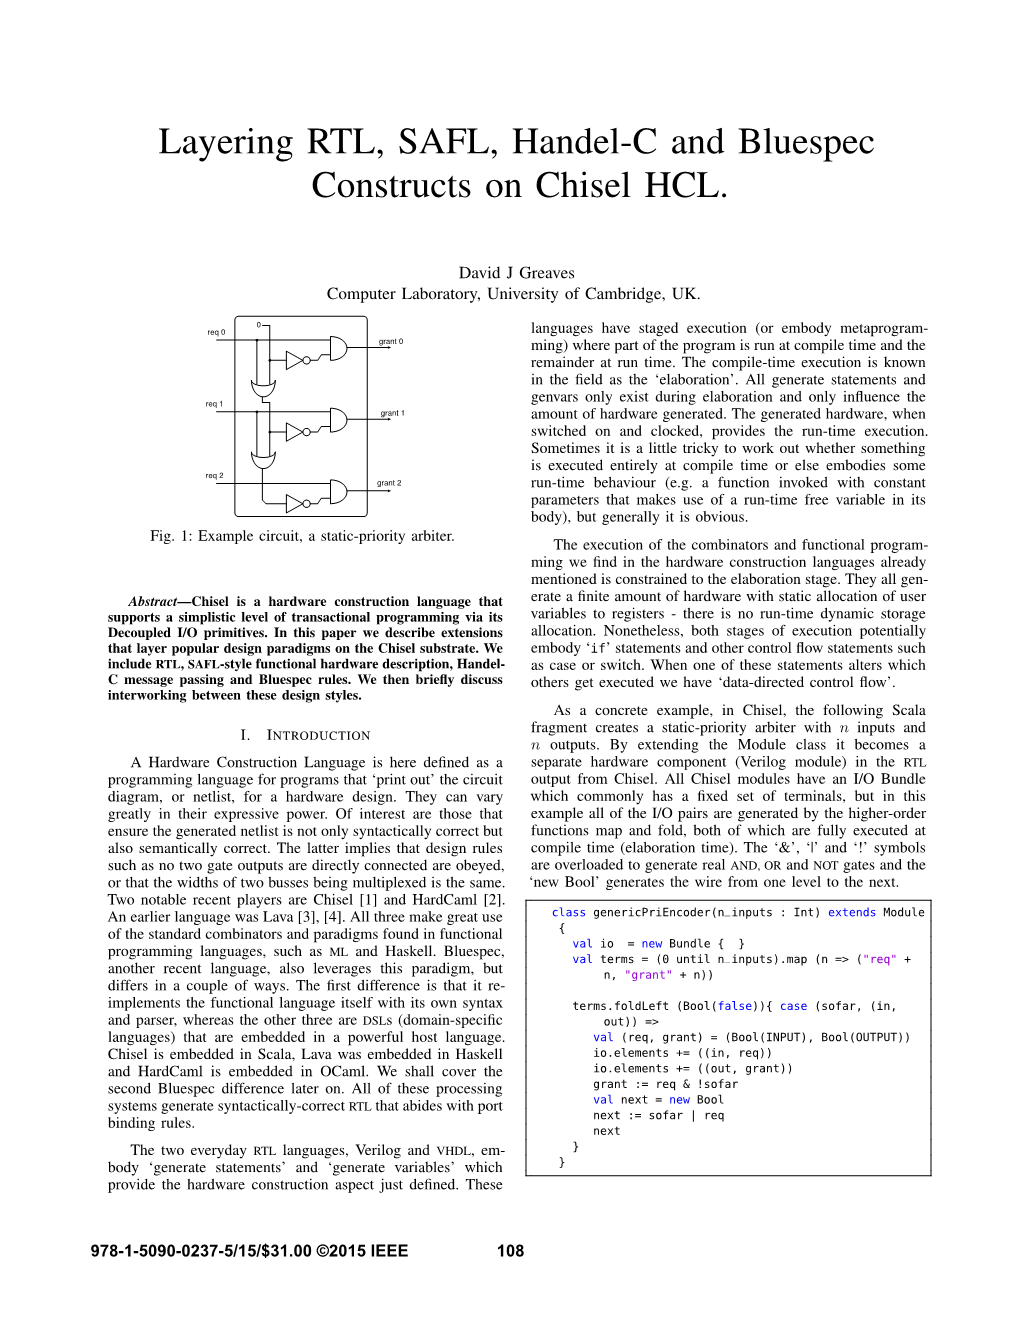 Layering RTL, SAFL, Handel-C and Bluespec Constructs on Chisel HCL